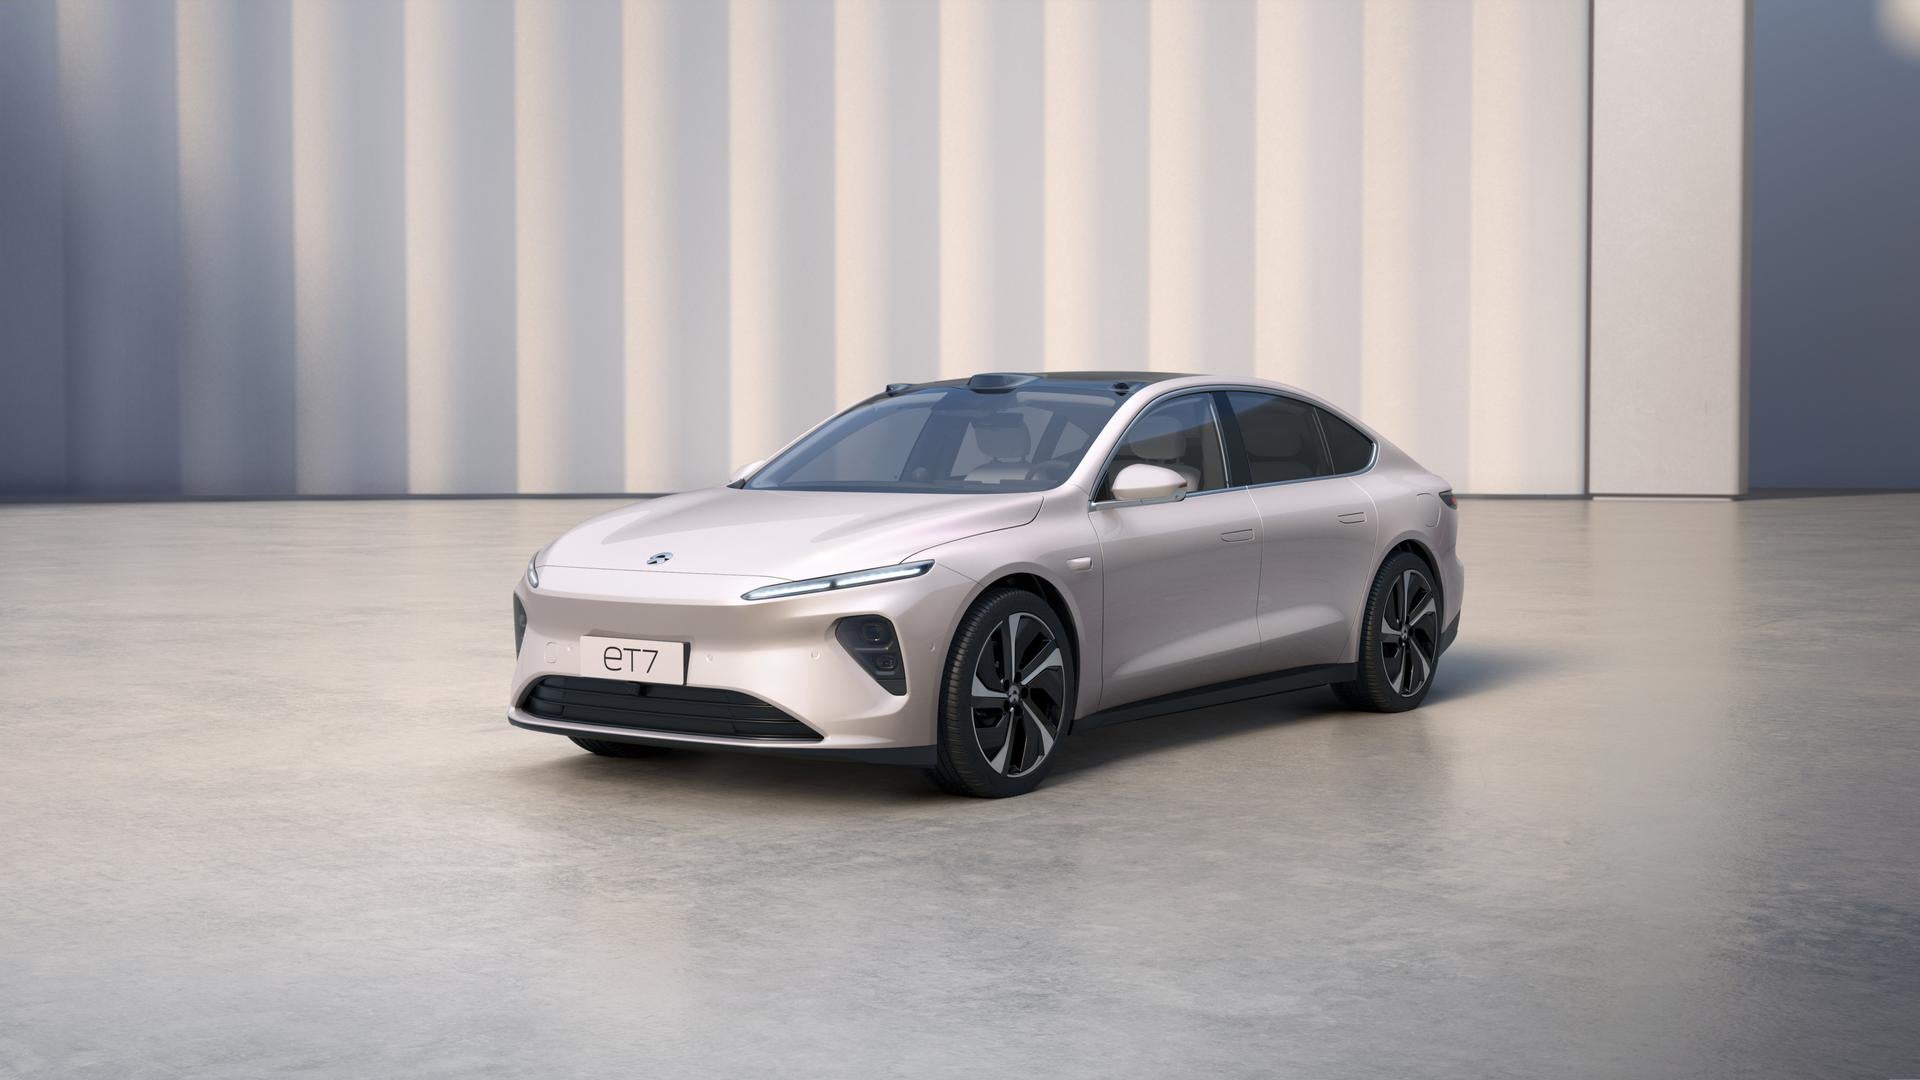 Test Drives of NIO’s First Sedan, the ET7 Lead to Remarkable, Rave Reviews